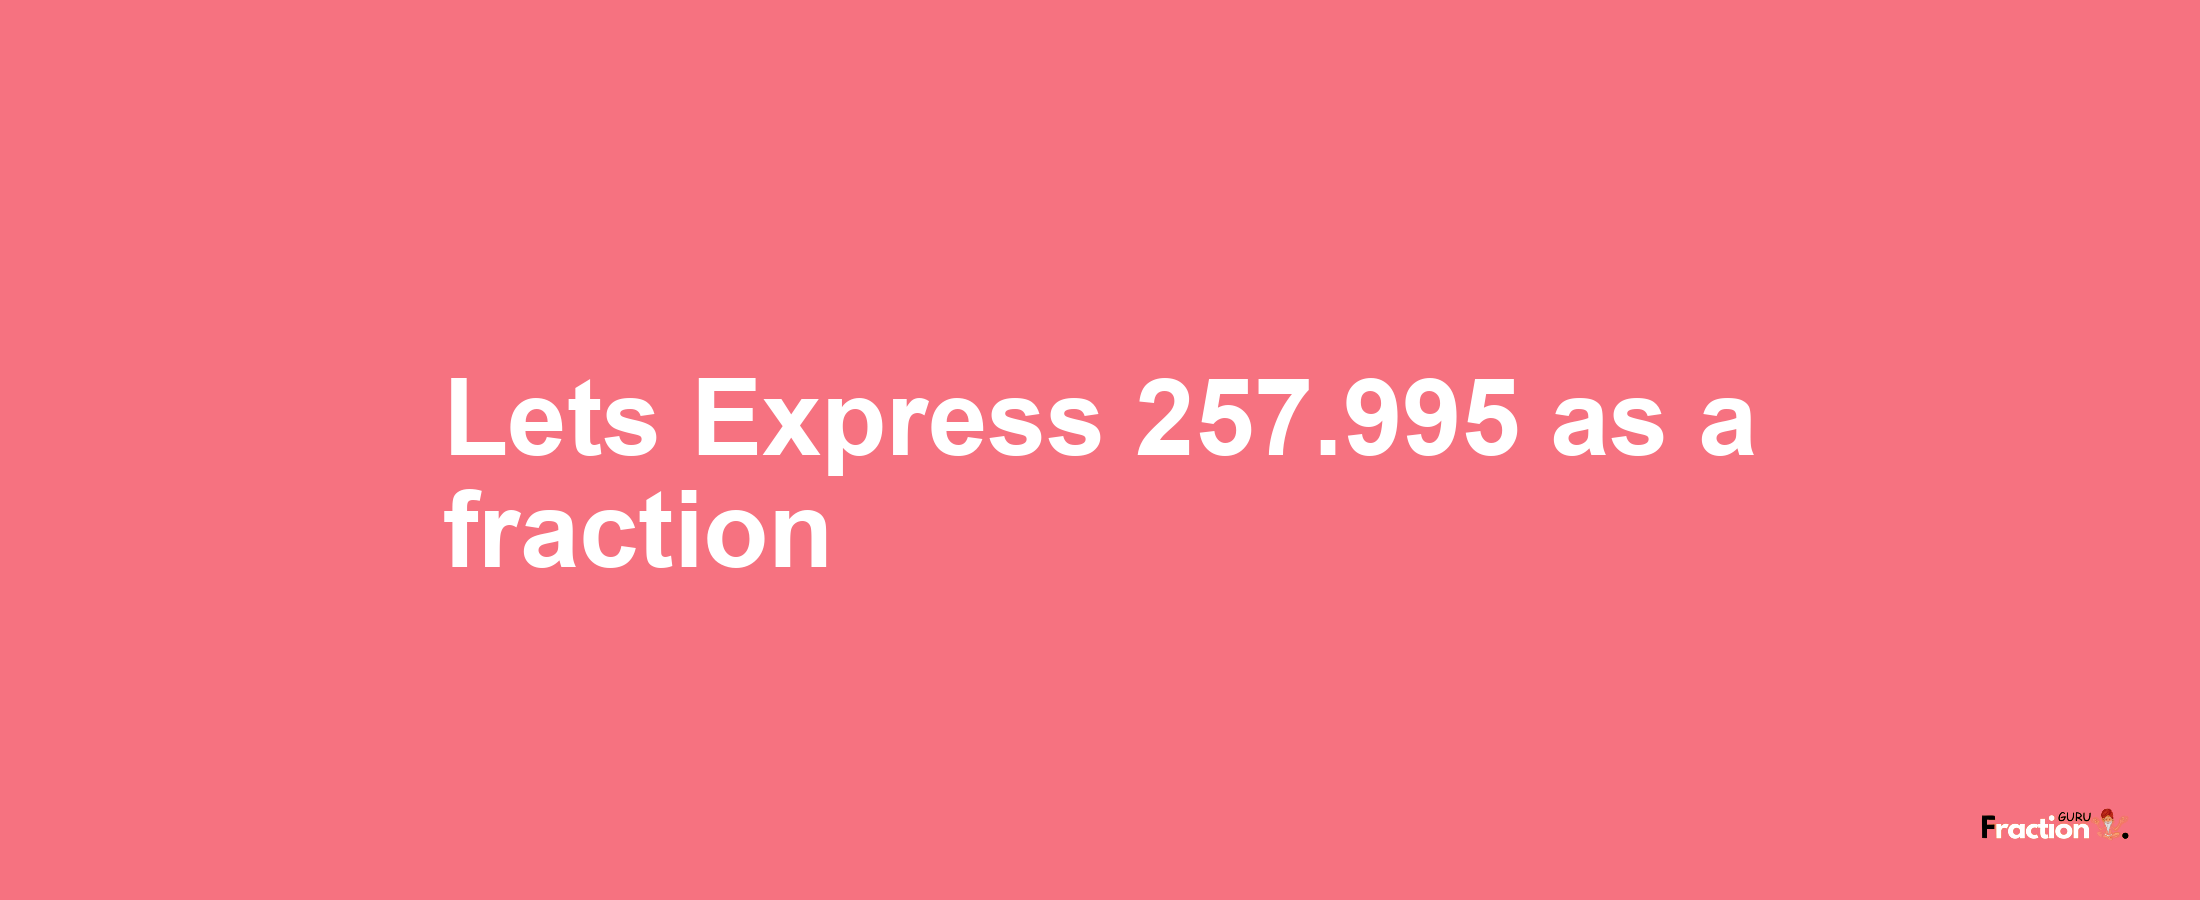 Lets Express 257.995 as afraction